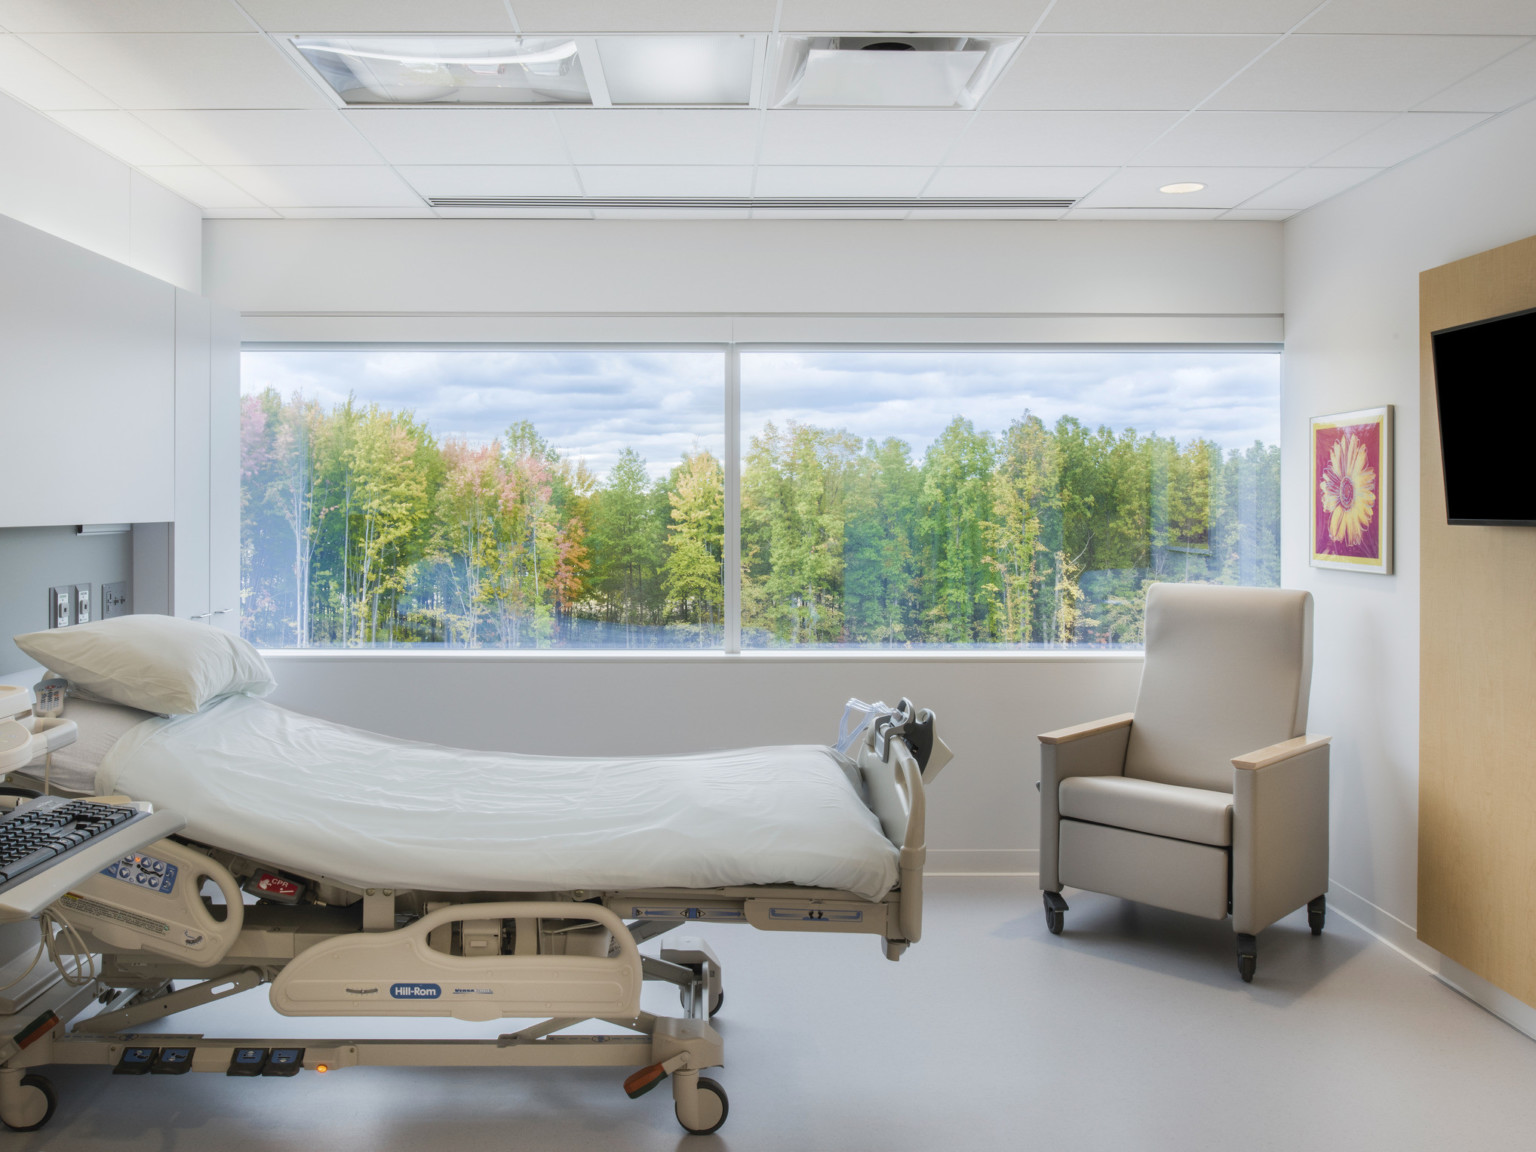 Hospital bed reclined in front of large window with views of trees. An arm chair faces the bed at the foot